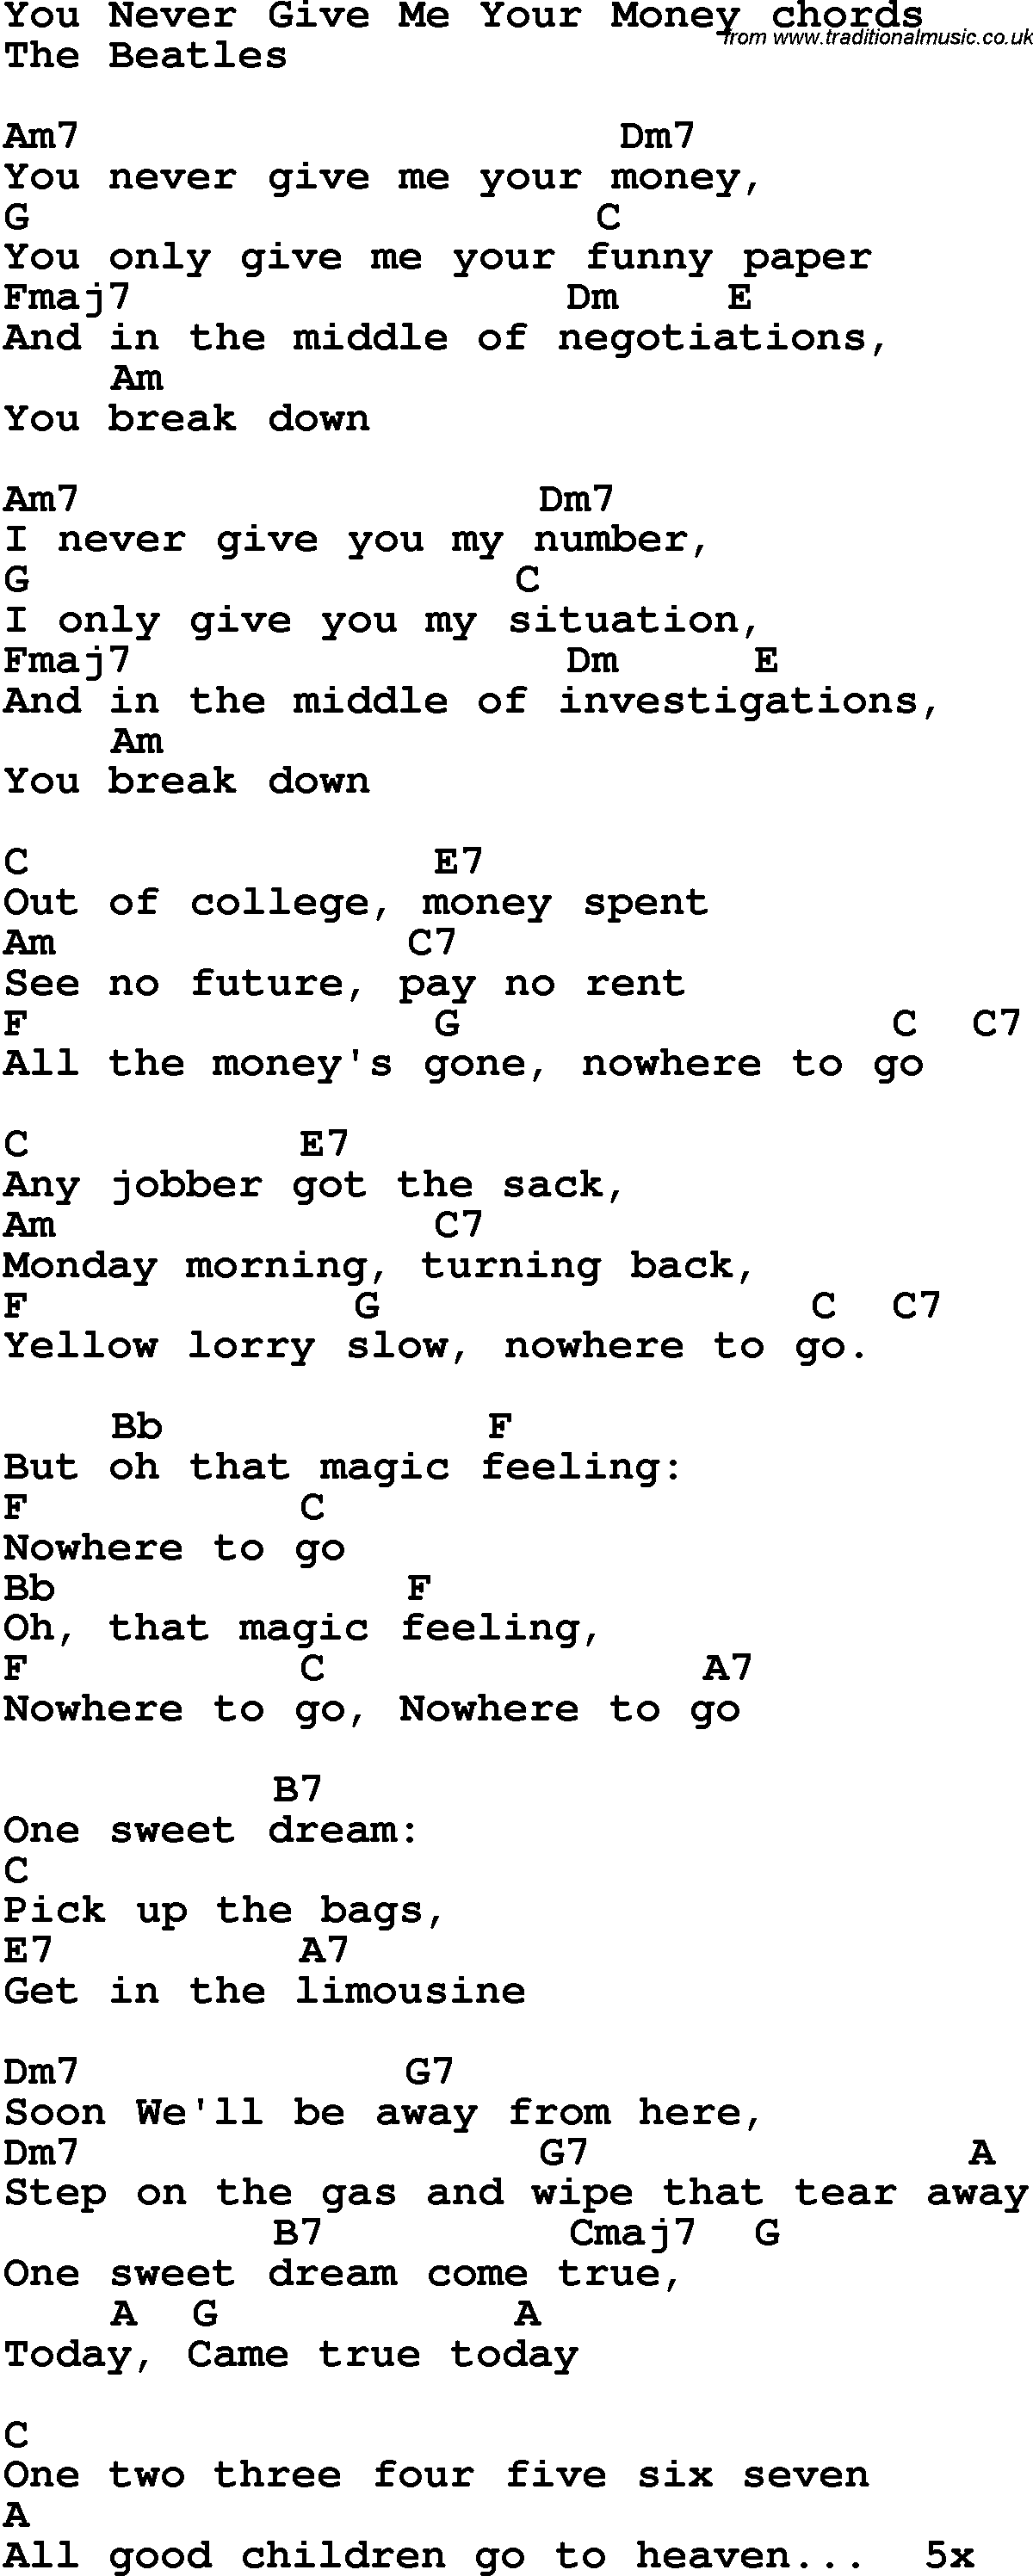 Song Lyrics with guitar chords for You Never Give Me Your Money